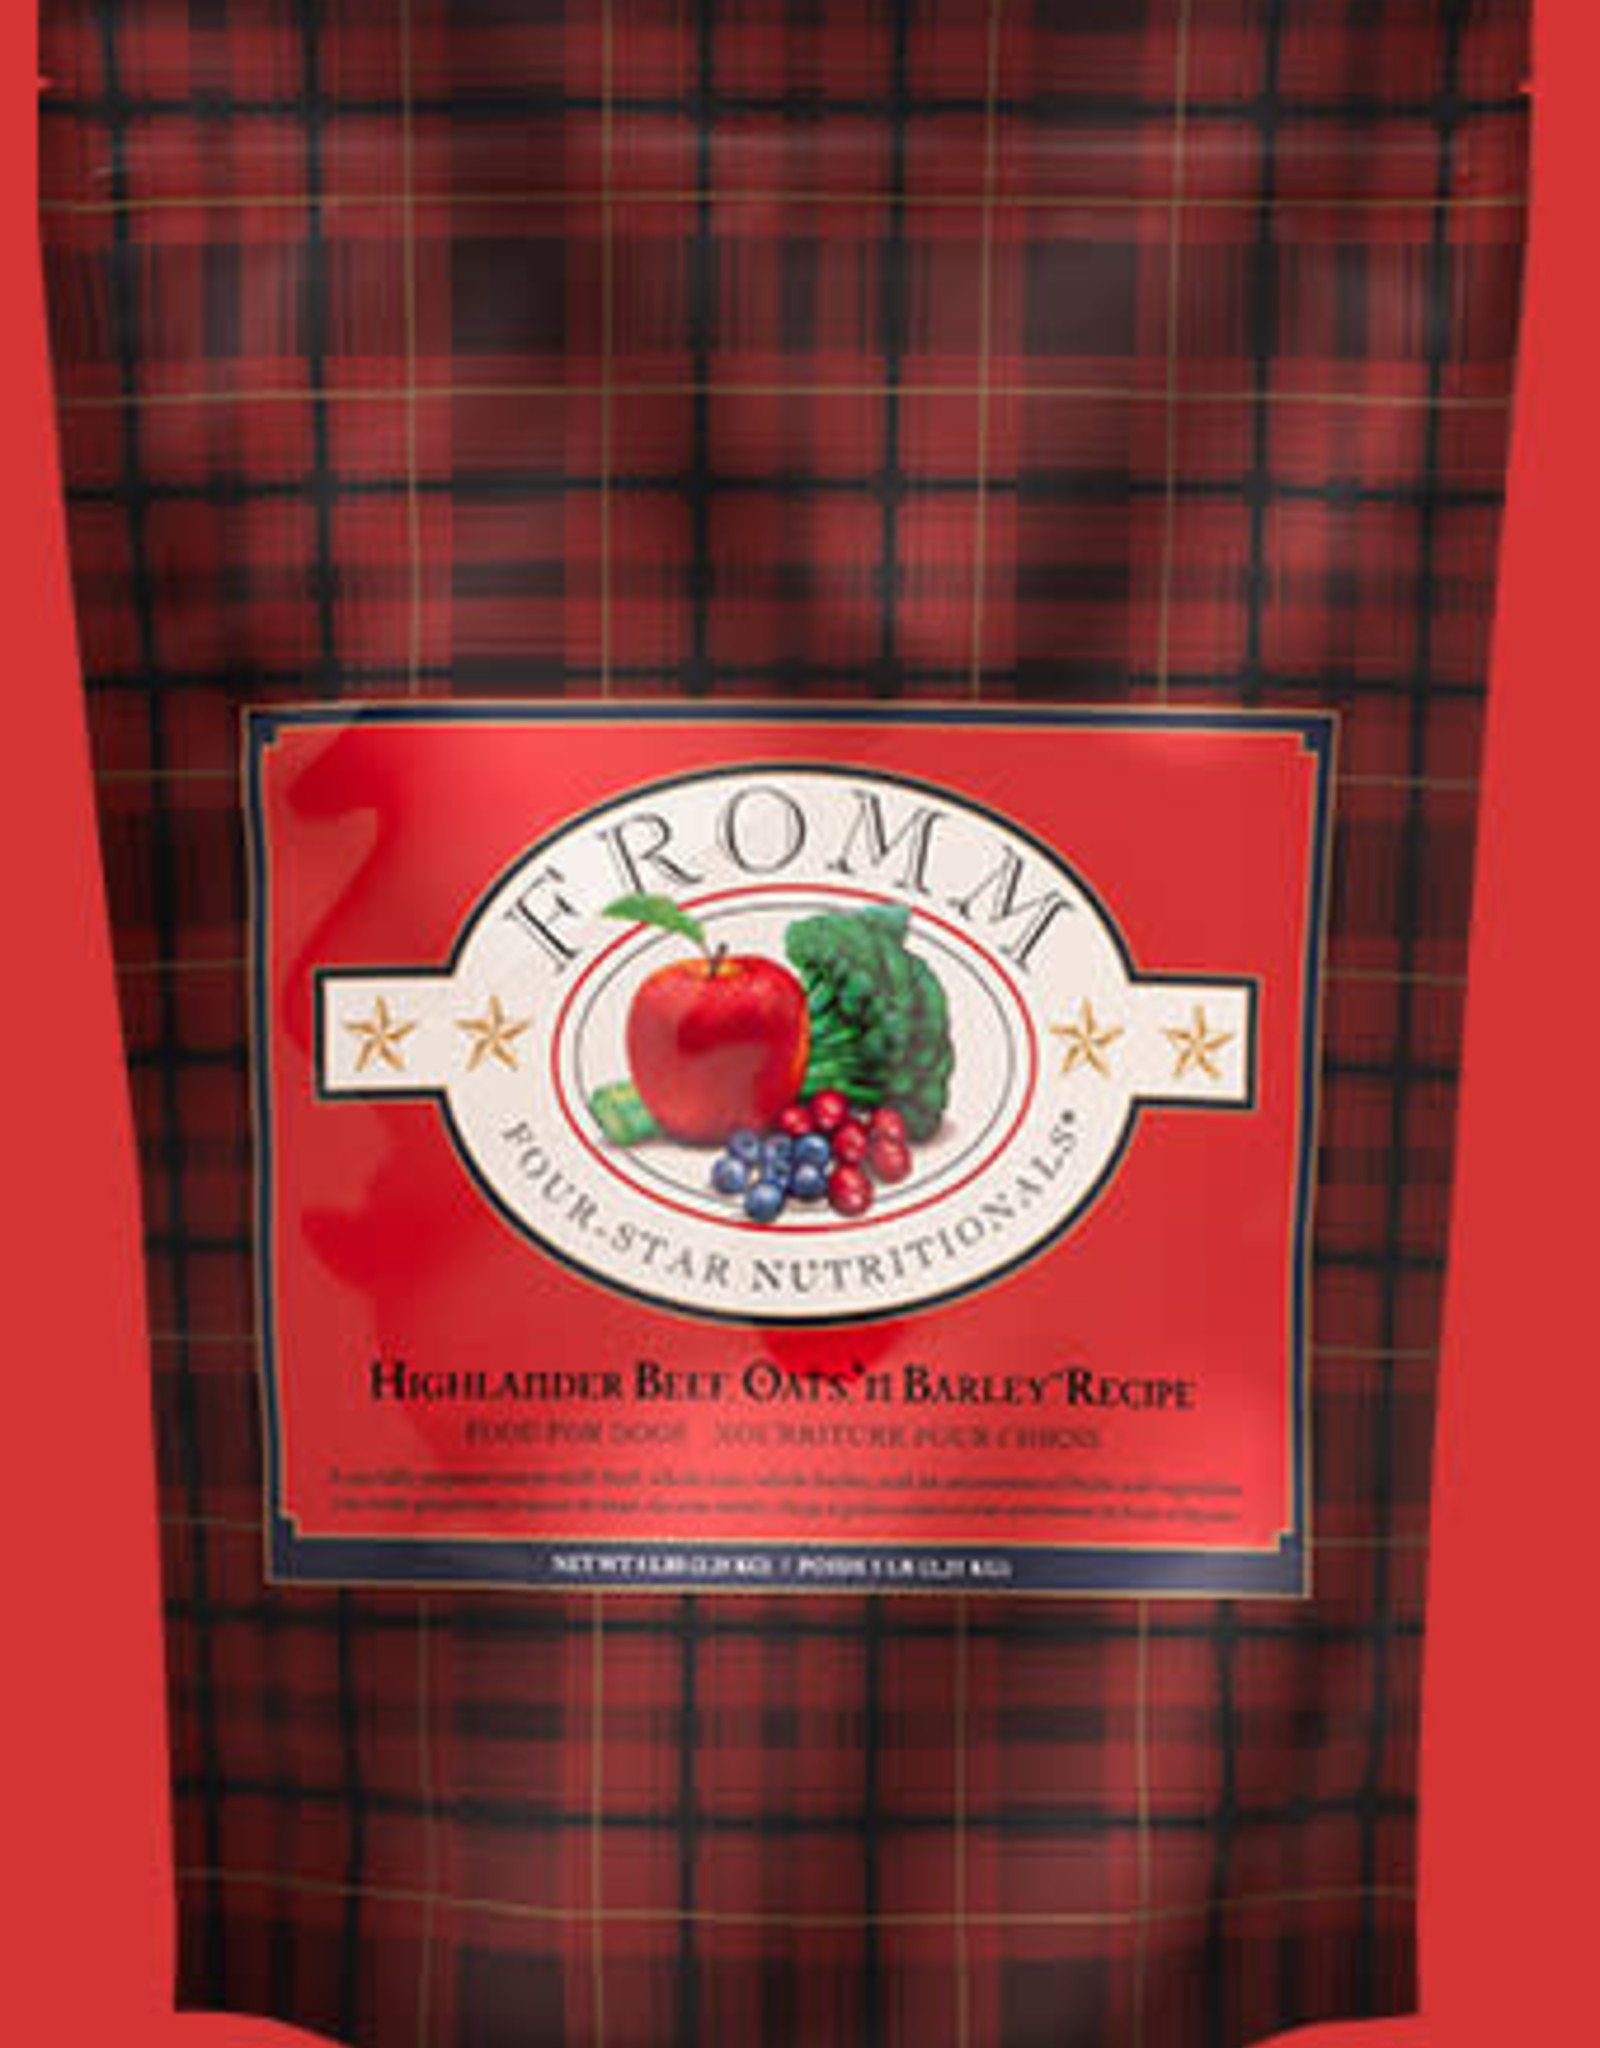 Fromm FROMM® FOUR STAR NUTRITIONALS® HIGHLANDER BEEF, OATS, 'N BARLEY RECIPE DRY DOG FOOD